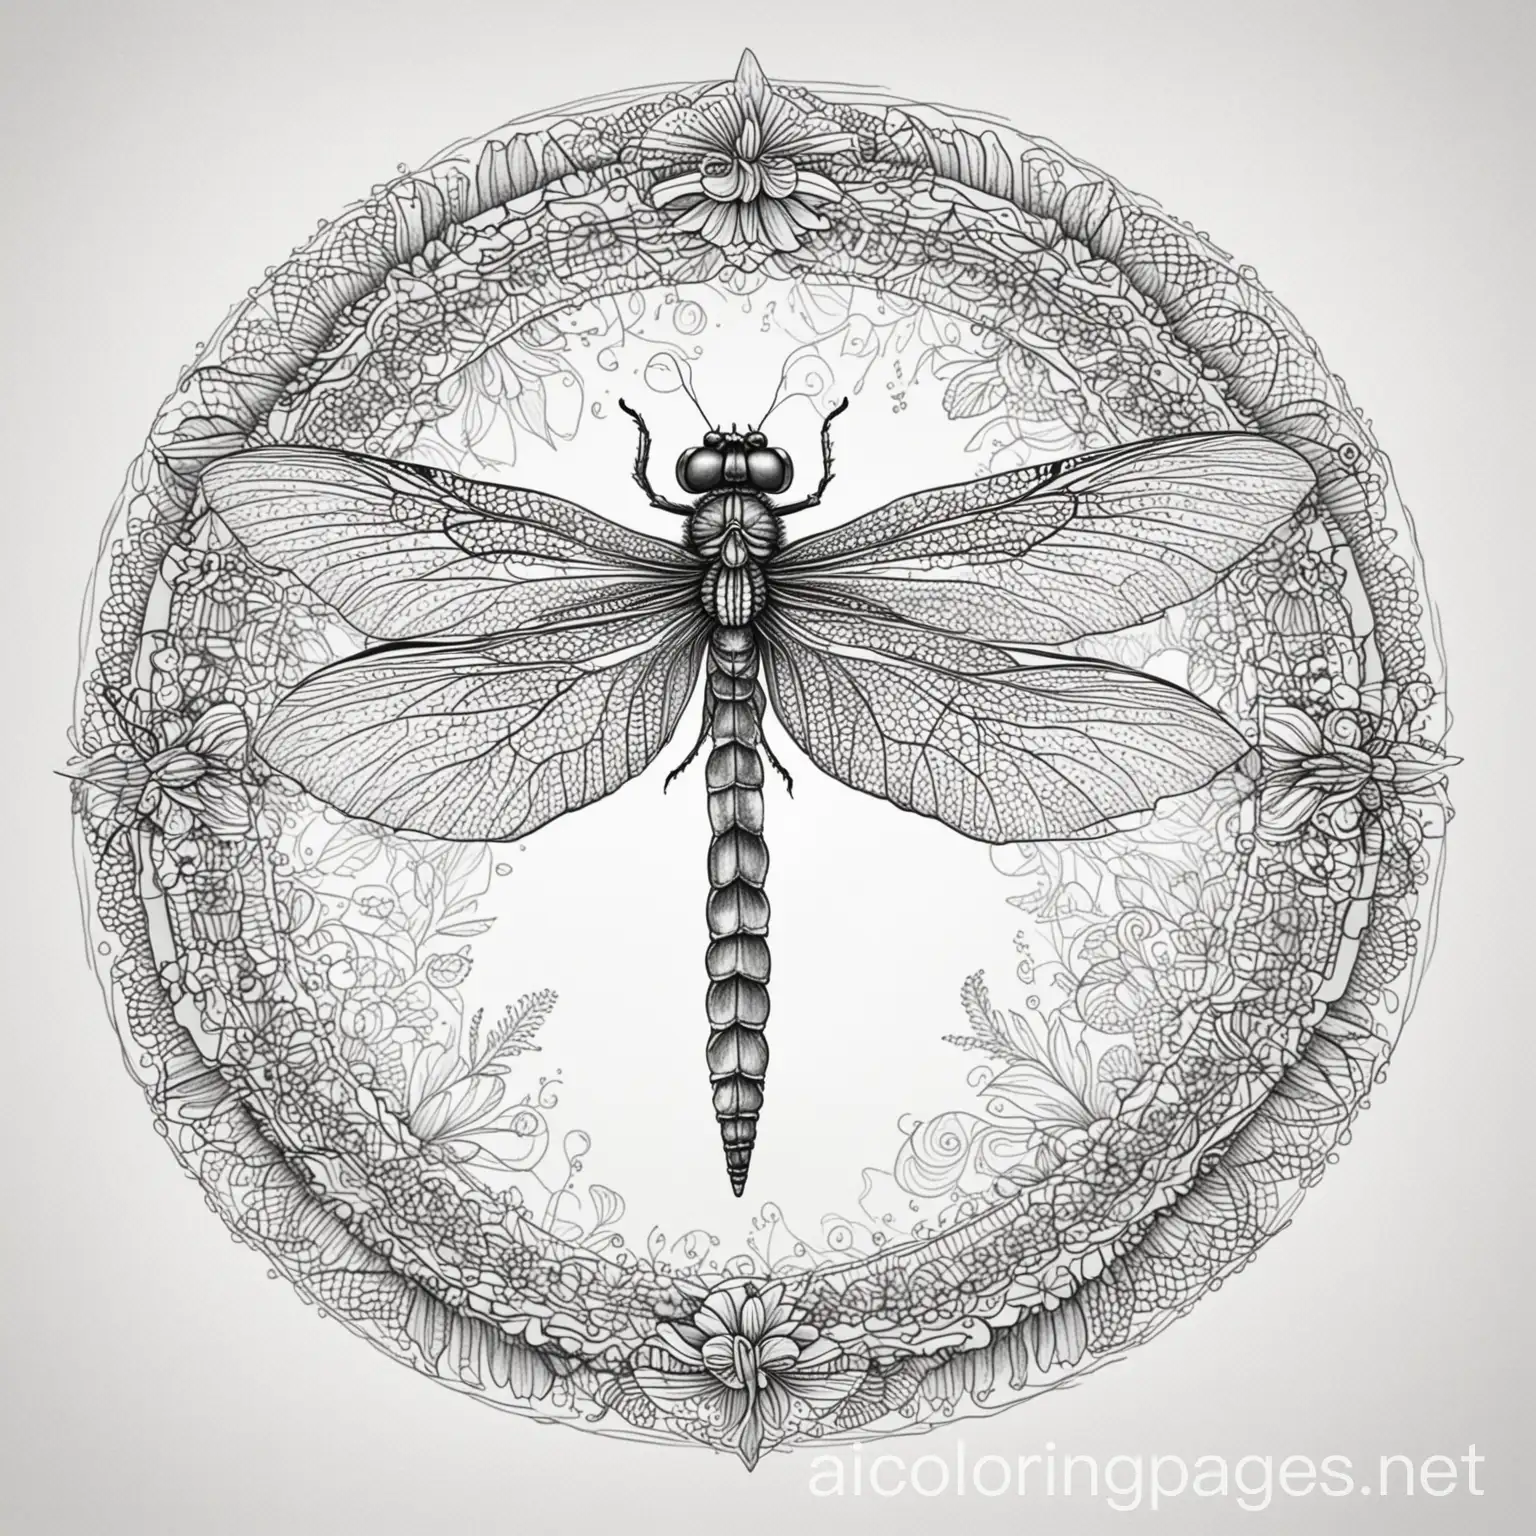 Dragonfly-Mandala-Coloring-Page-Black-and-White-Line-Art-on-White-Background